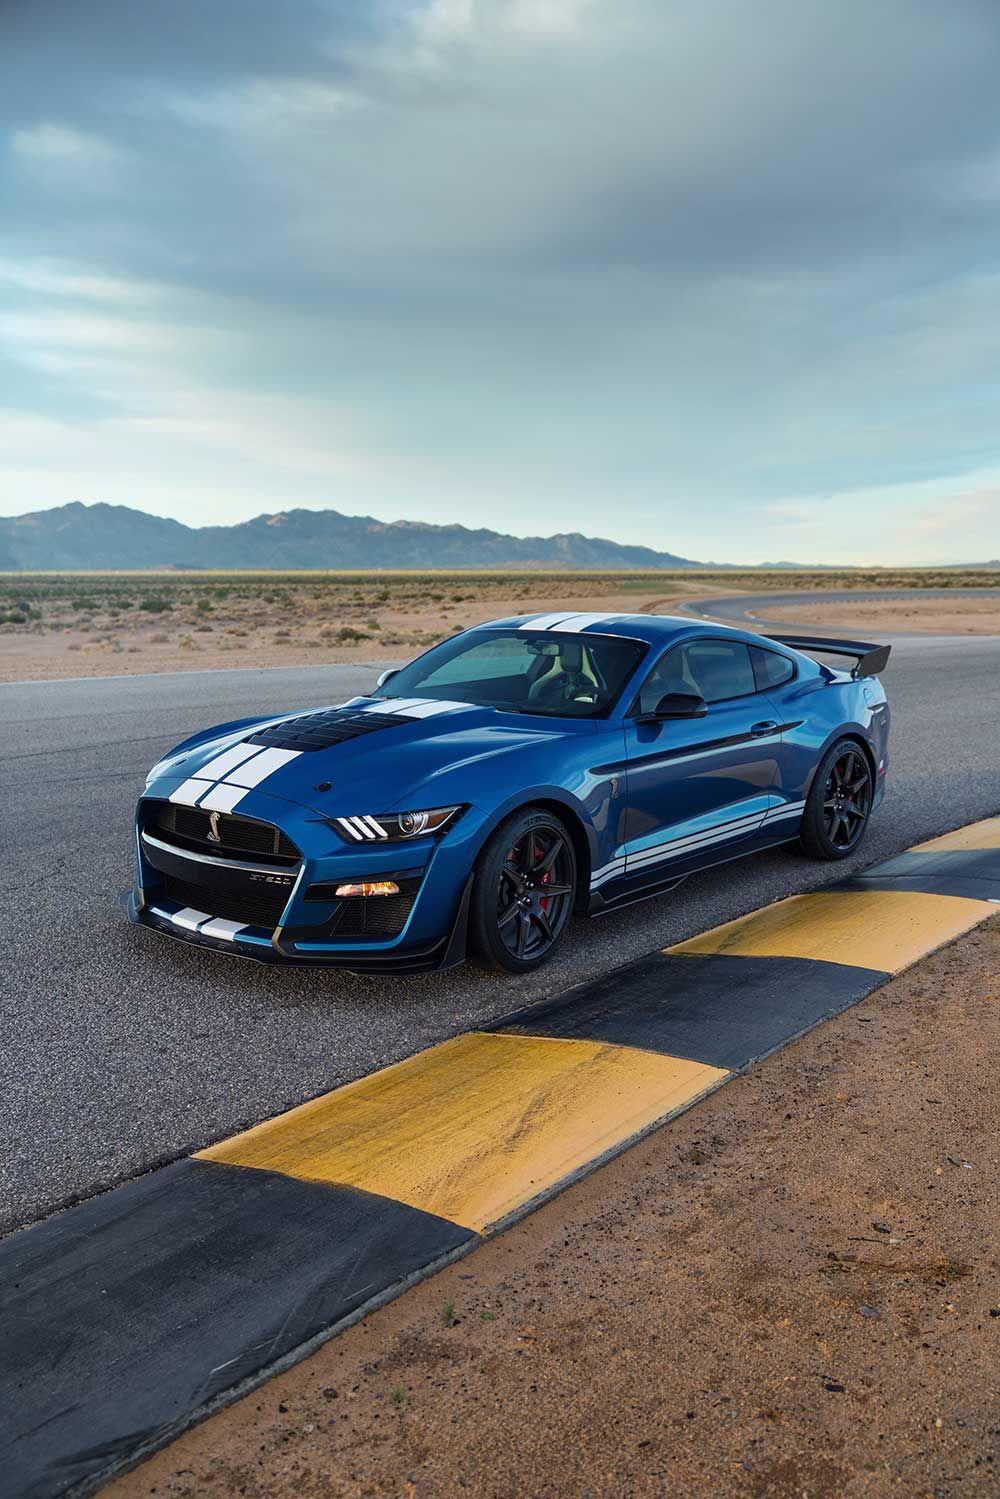 Ford Mustang Shelby GT500 Picture & Wallpaper. Ford